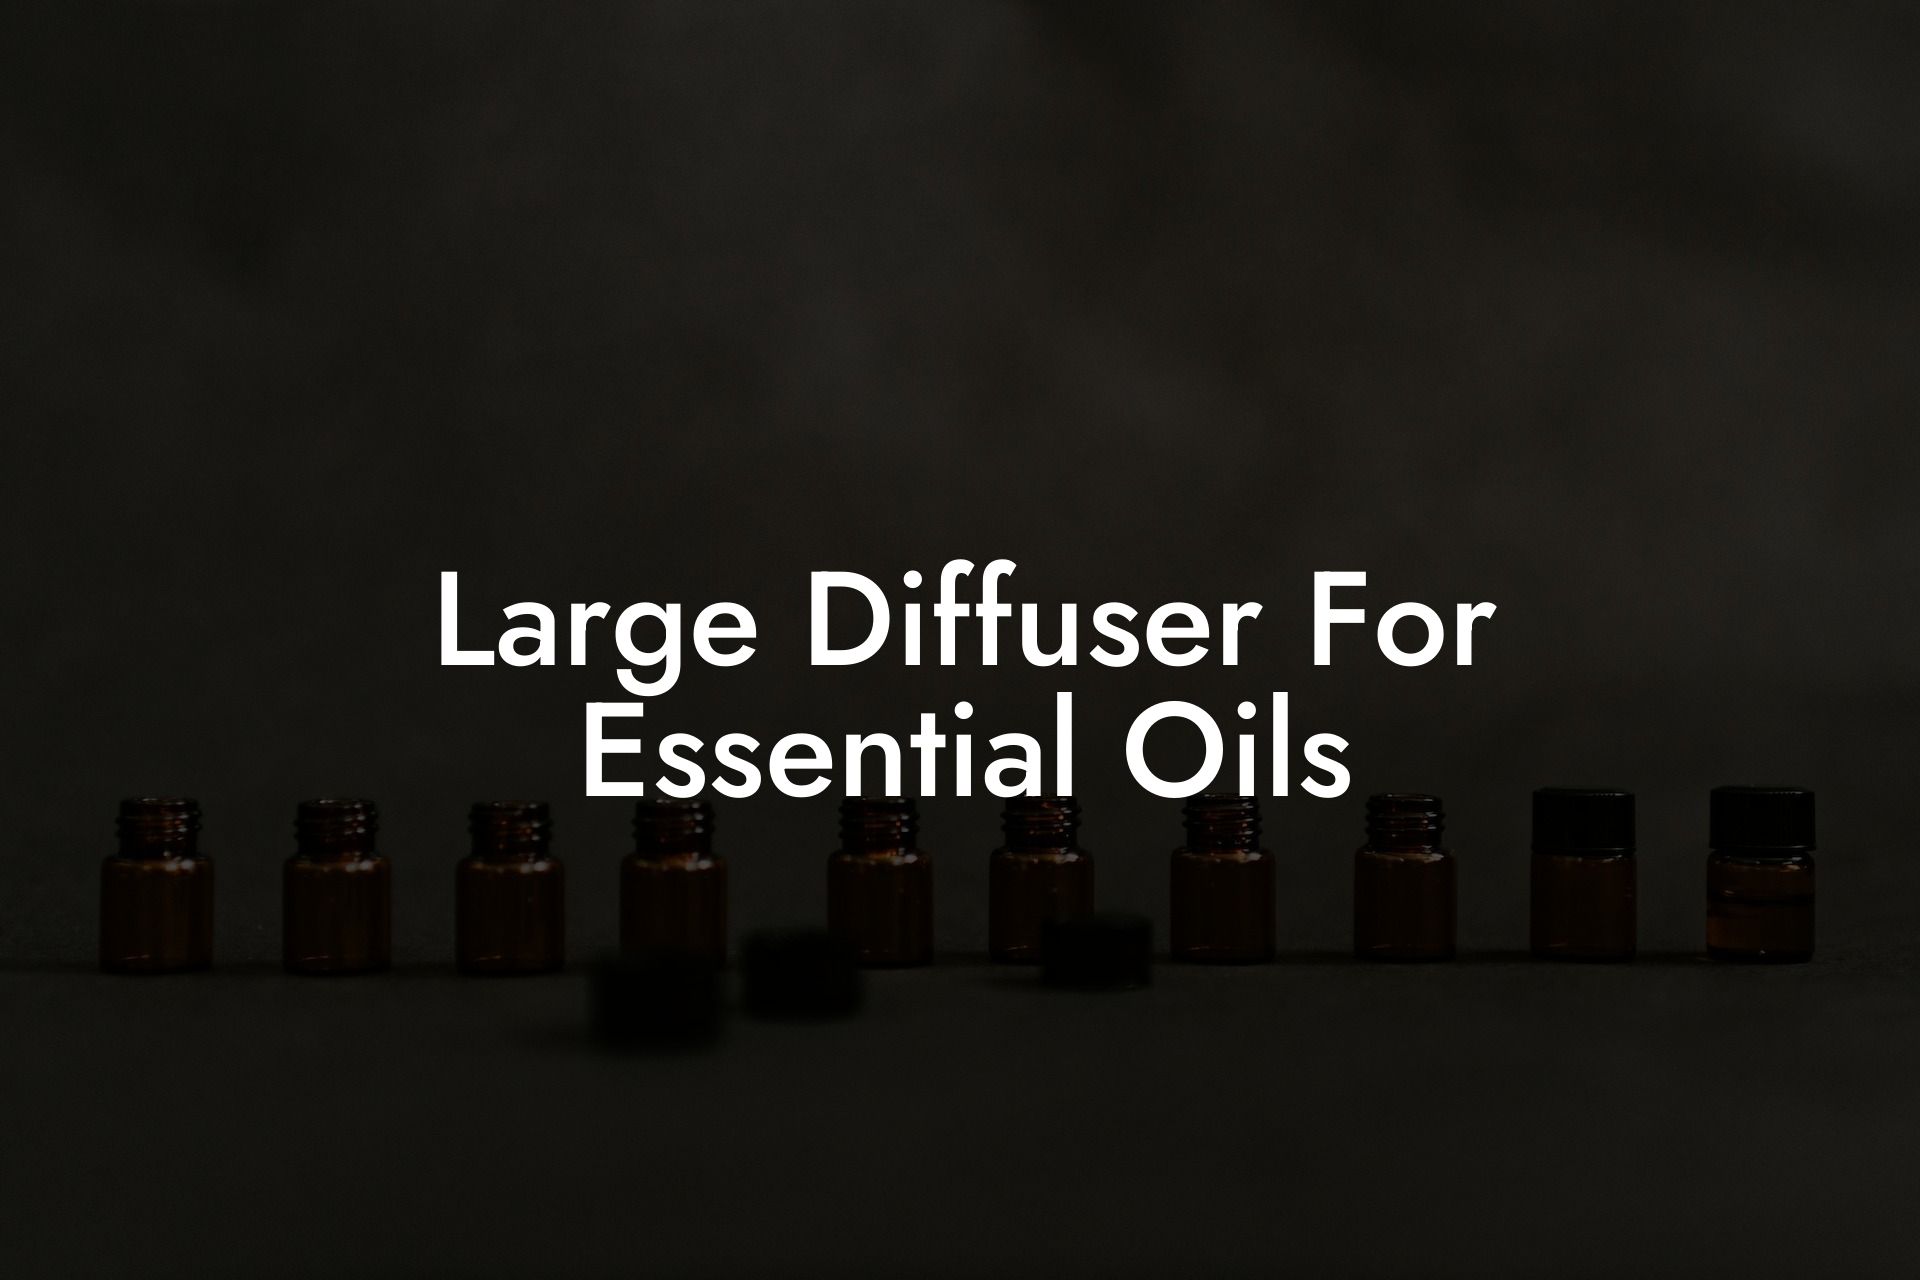 Large Diffuser For Essential Oils